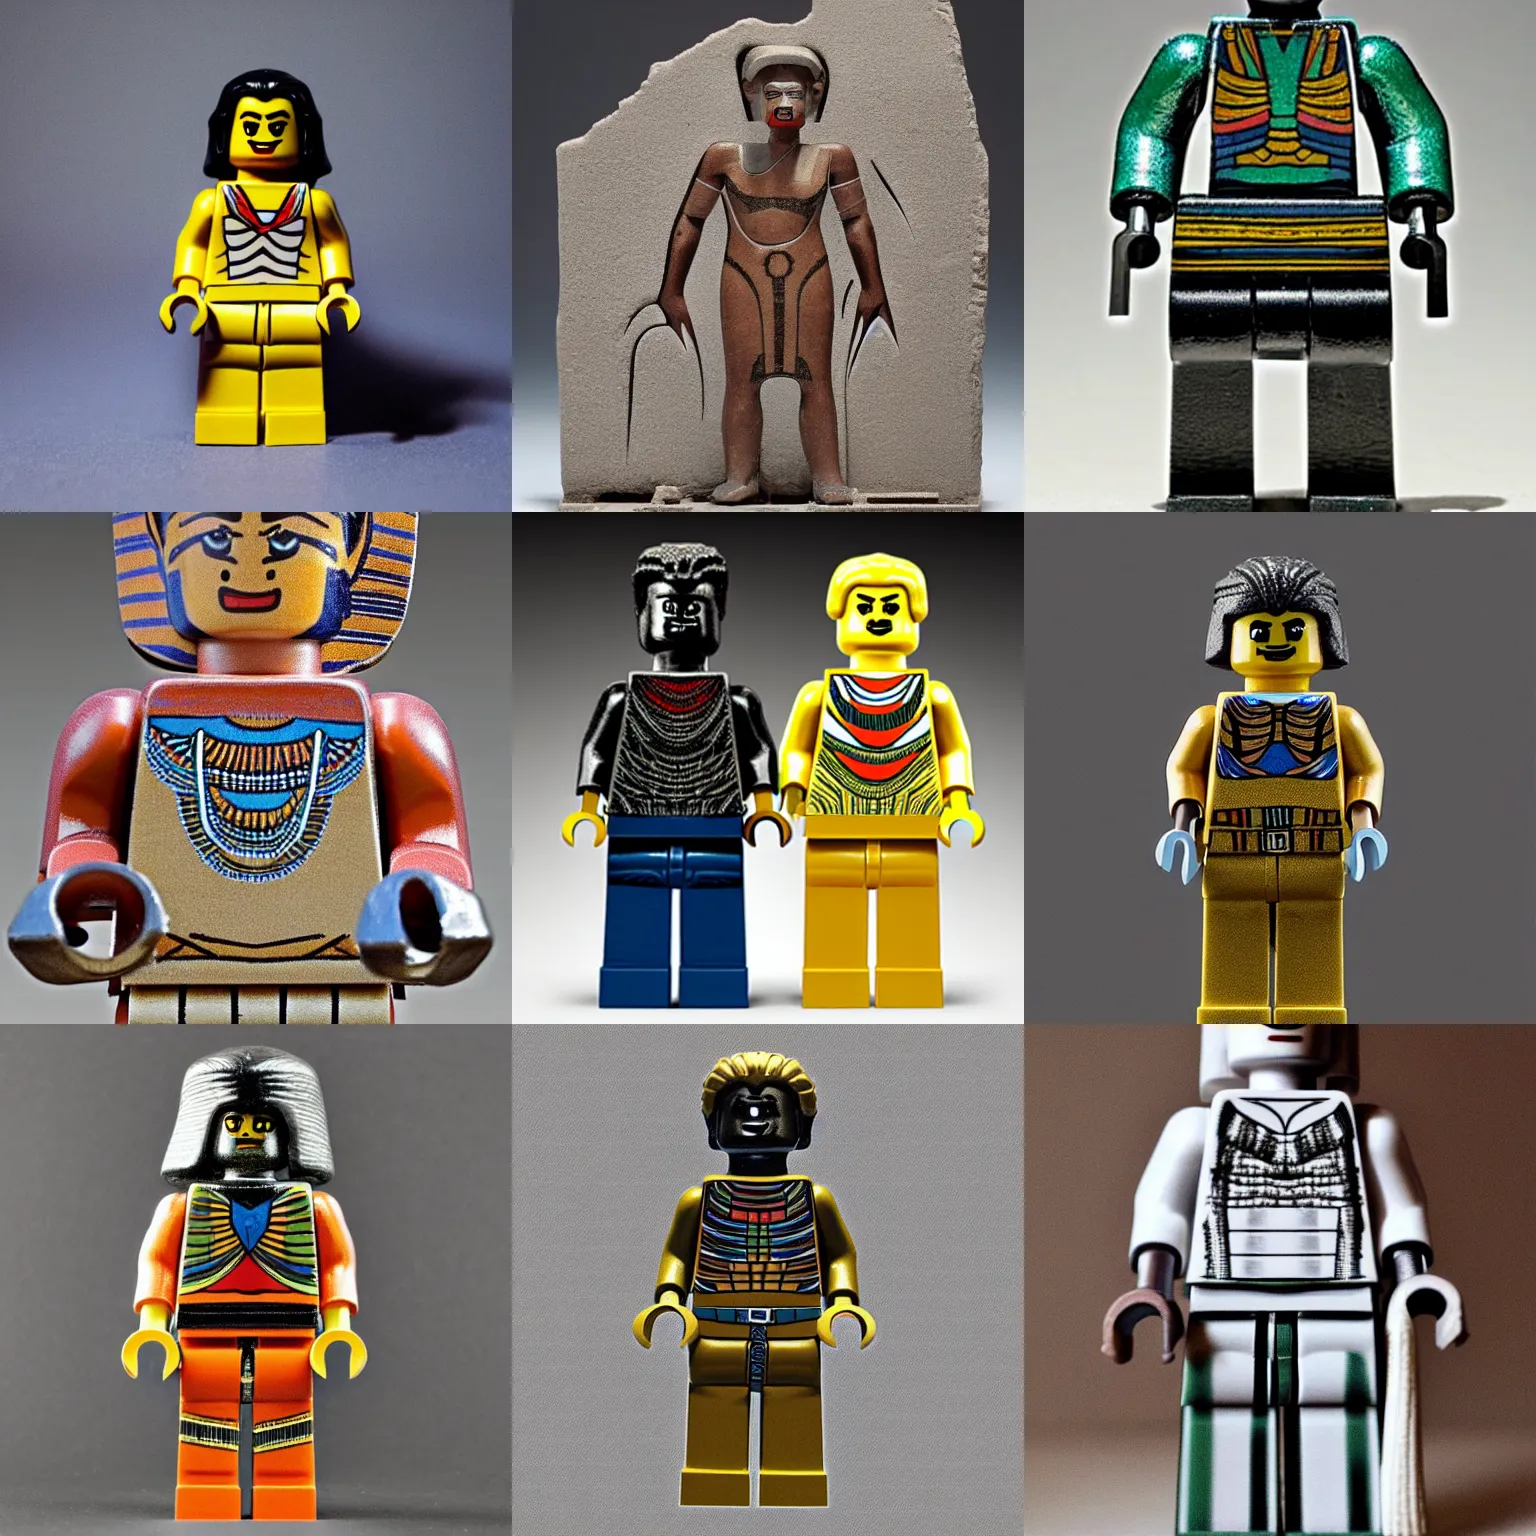 Prompt: egyptian sculpture of a lego minifigure